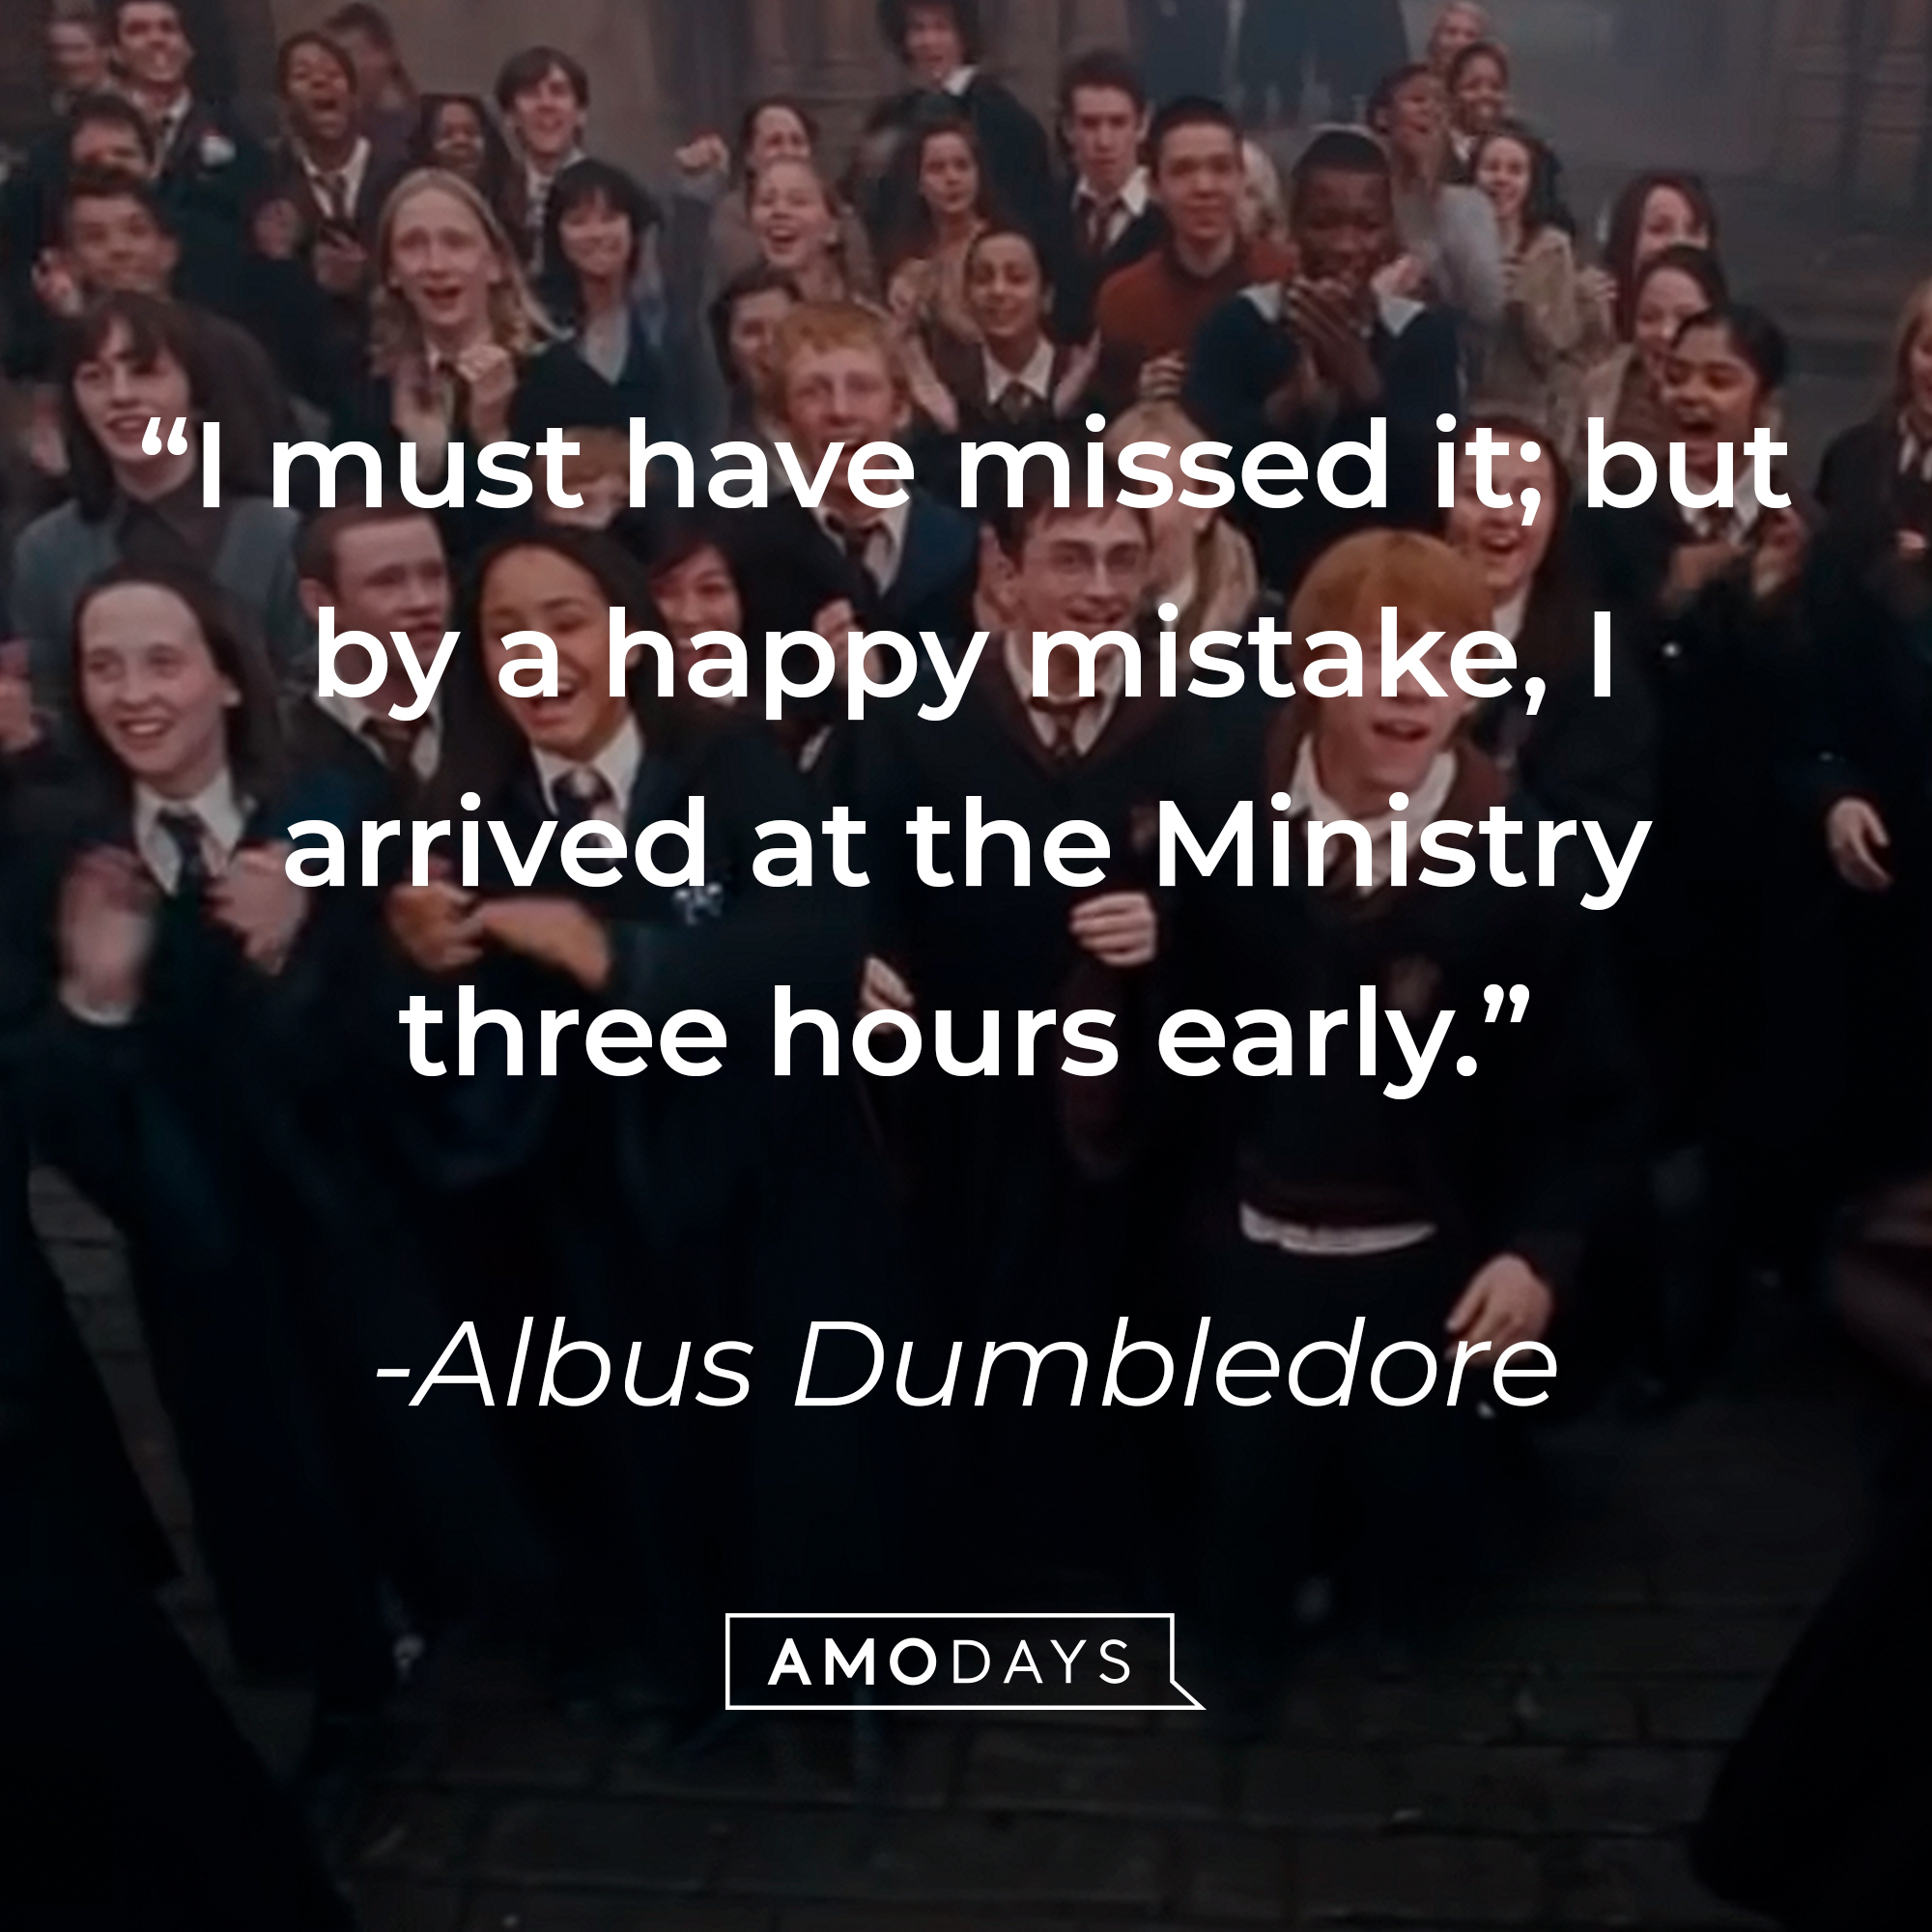 Albus Dumbledore's quote: “I must have missed it; but by a happy mistake, I arrived at the Ministry three hours early.” Source: youtube.com/harrypotter